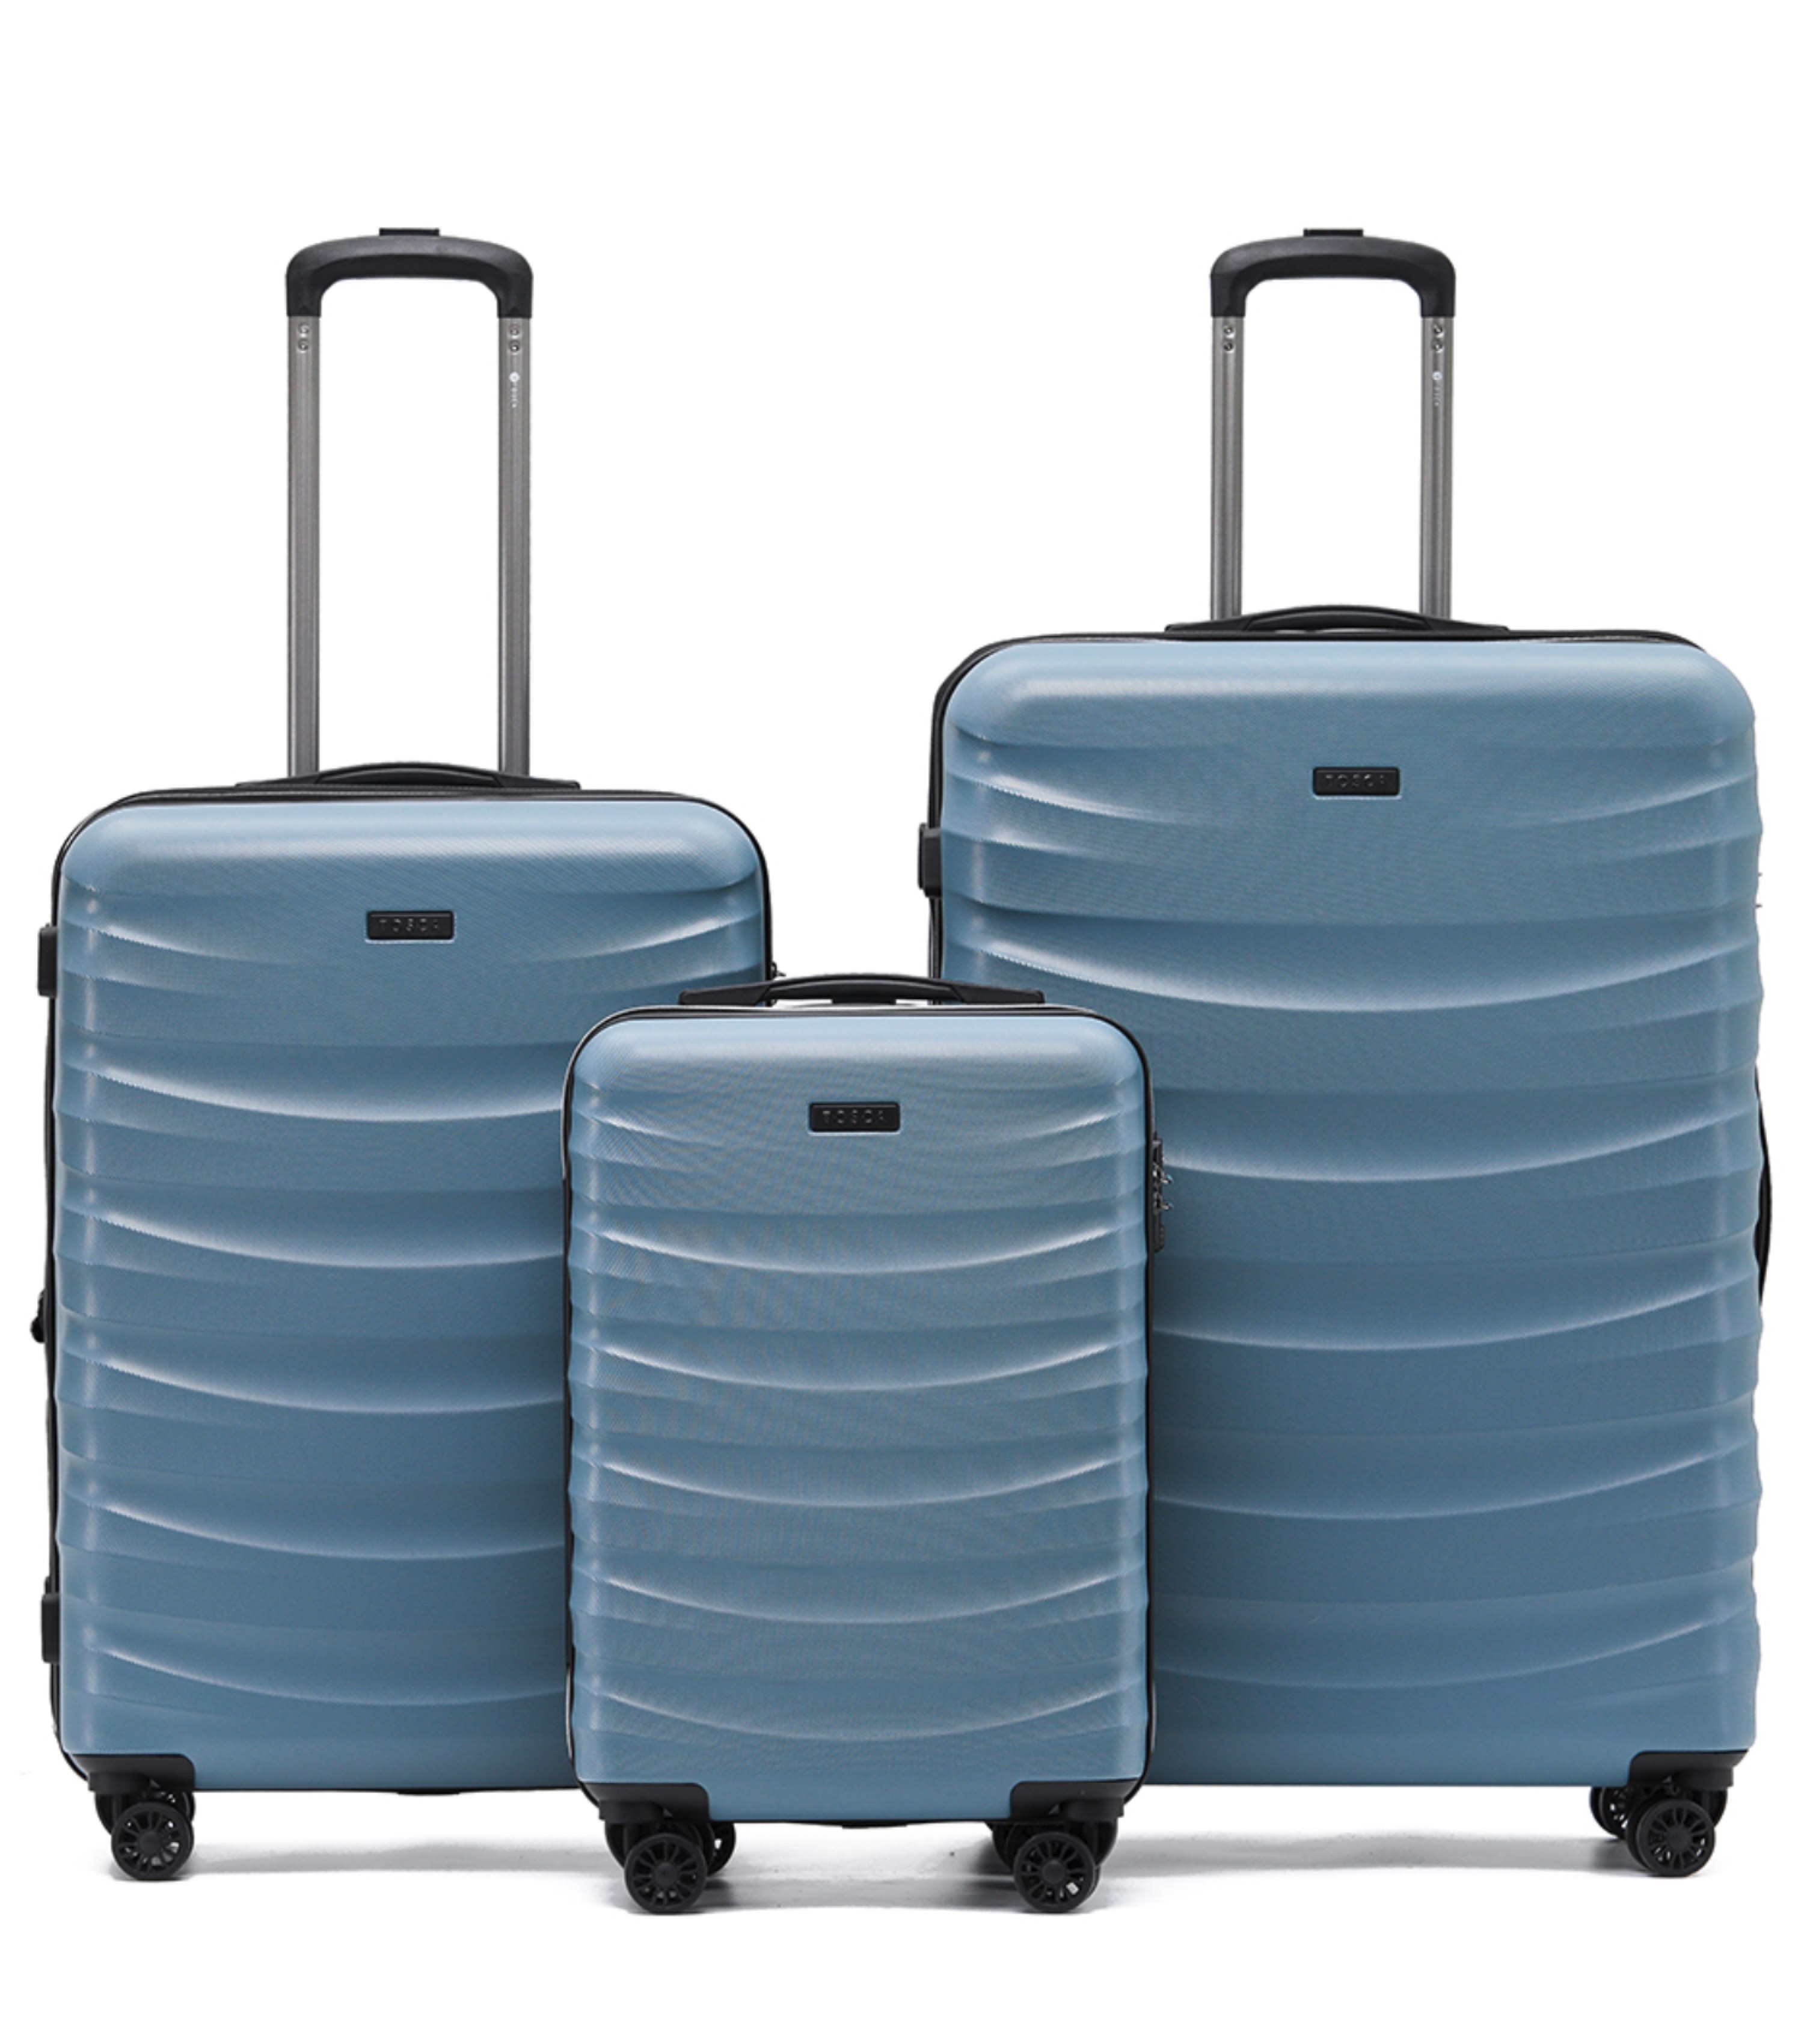 Tosca Interstellar 4-Wheel Expandable Luggage Set of 3 - Blue (Small ...